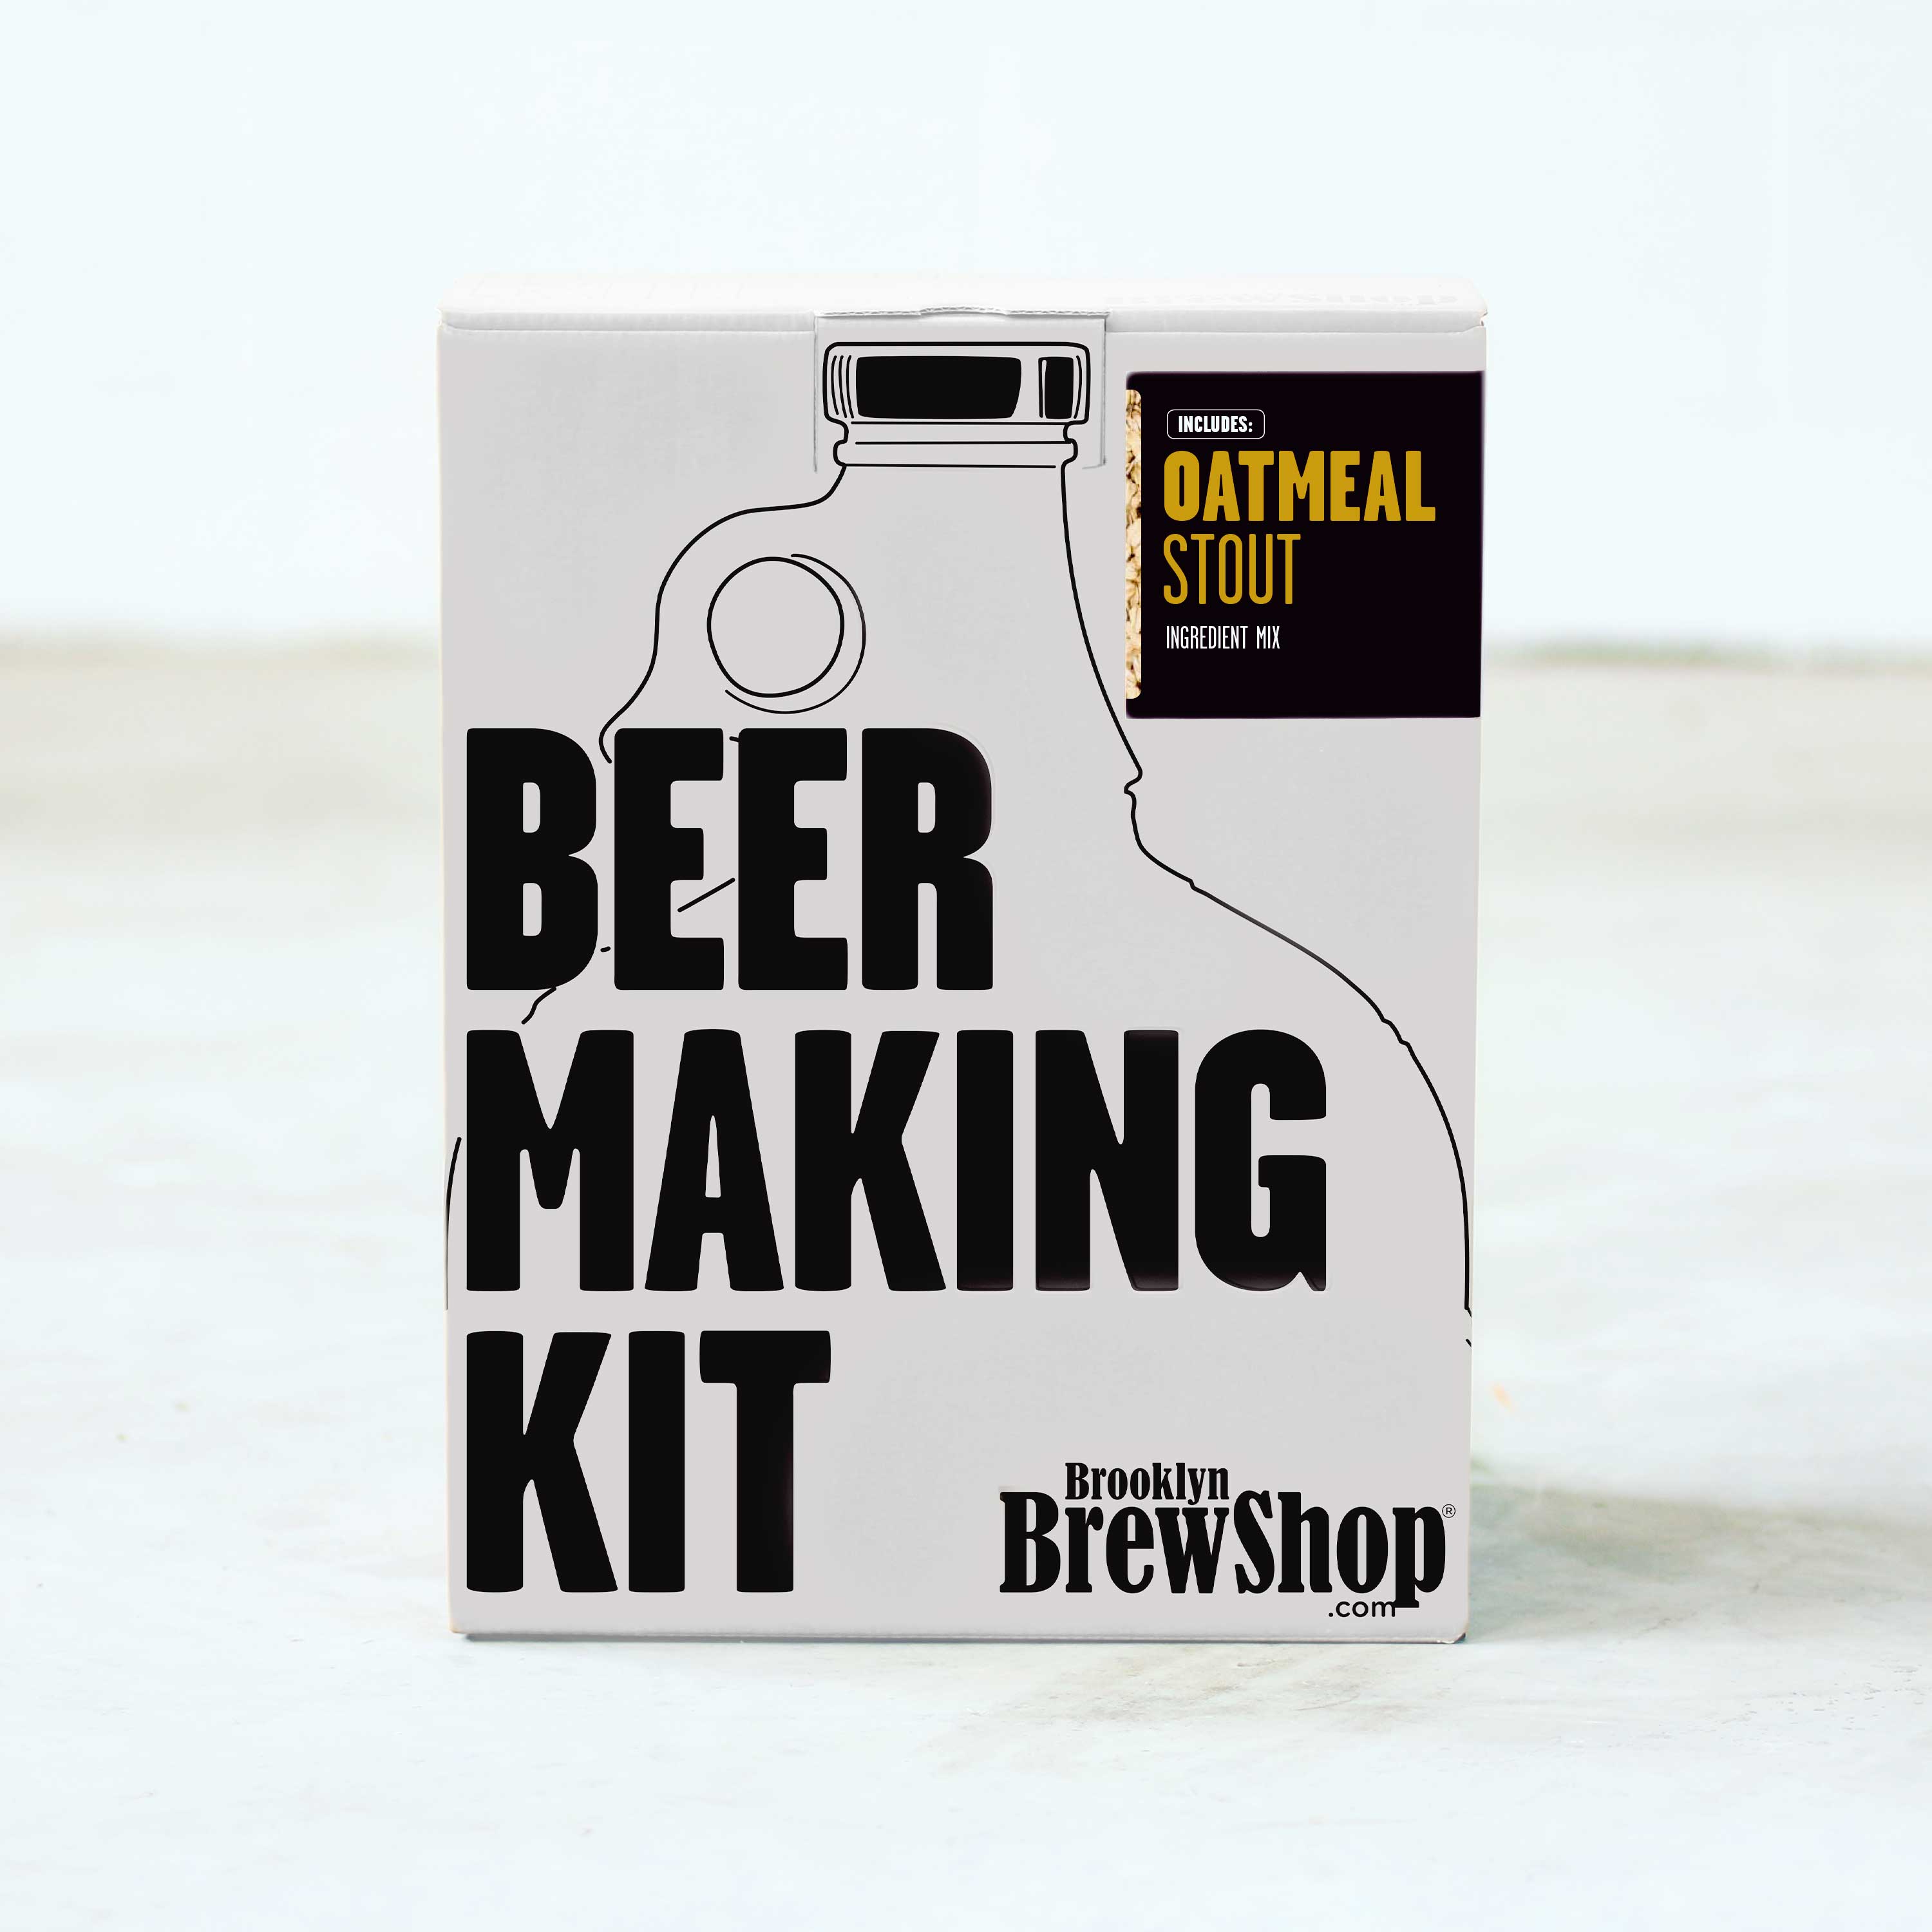 Image of Oatmeal Stout: Beer Making Kit